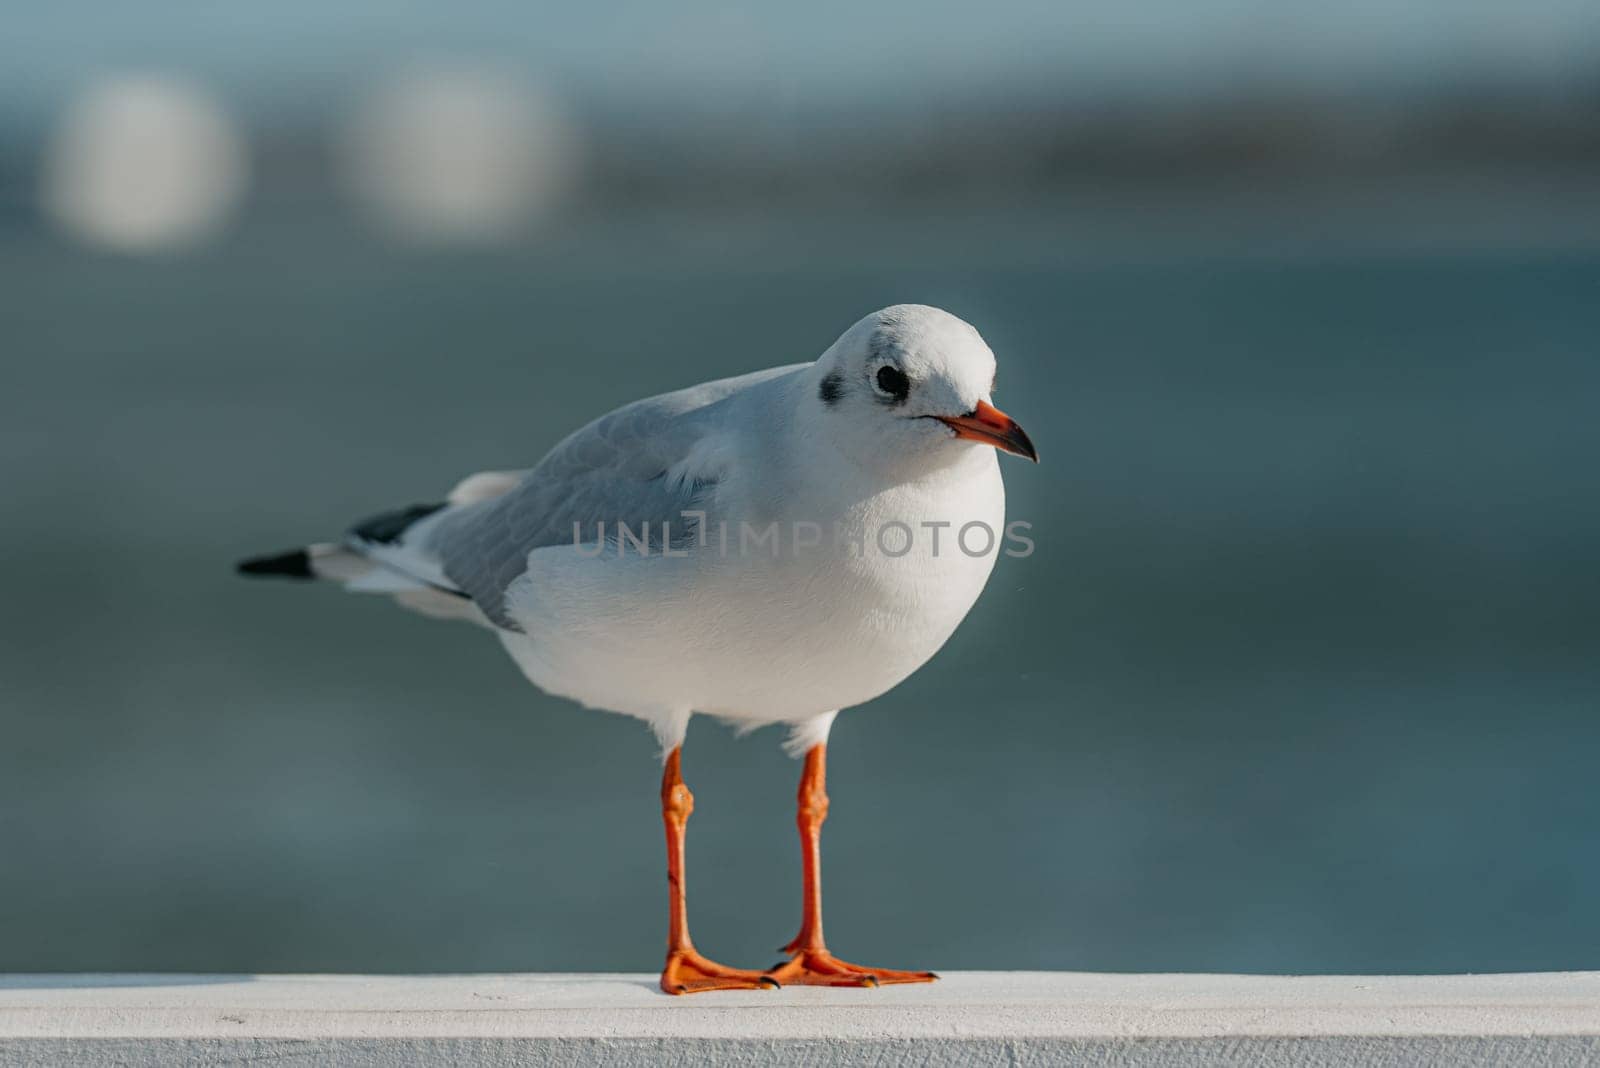 The close up black-headed adult gull in winter plumage looks for something on a pier fence on the autumn Baltic Sea.